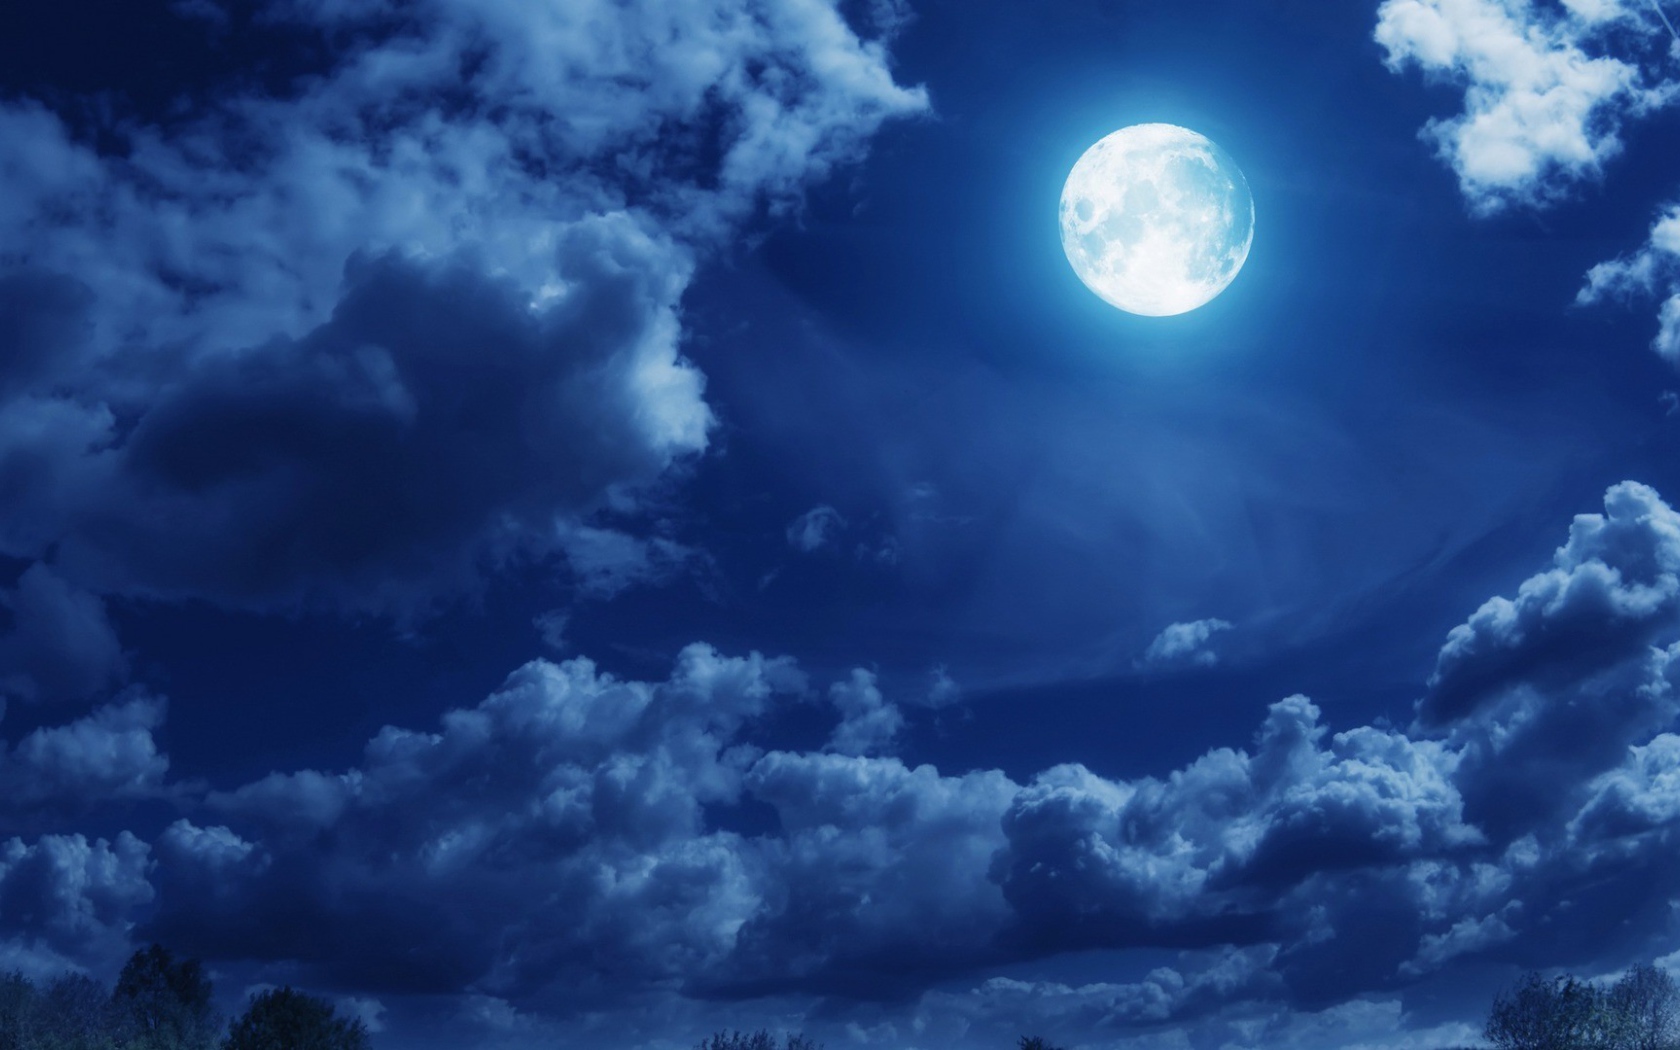 Clouds in the moonlit night